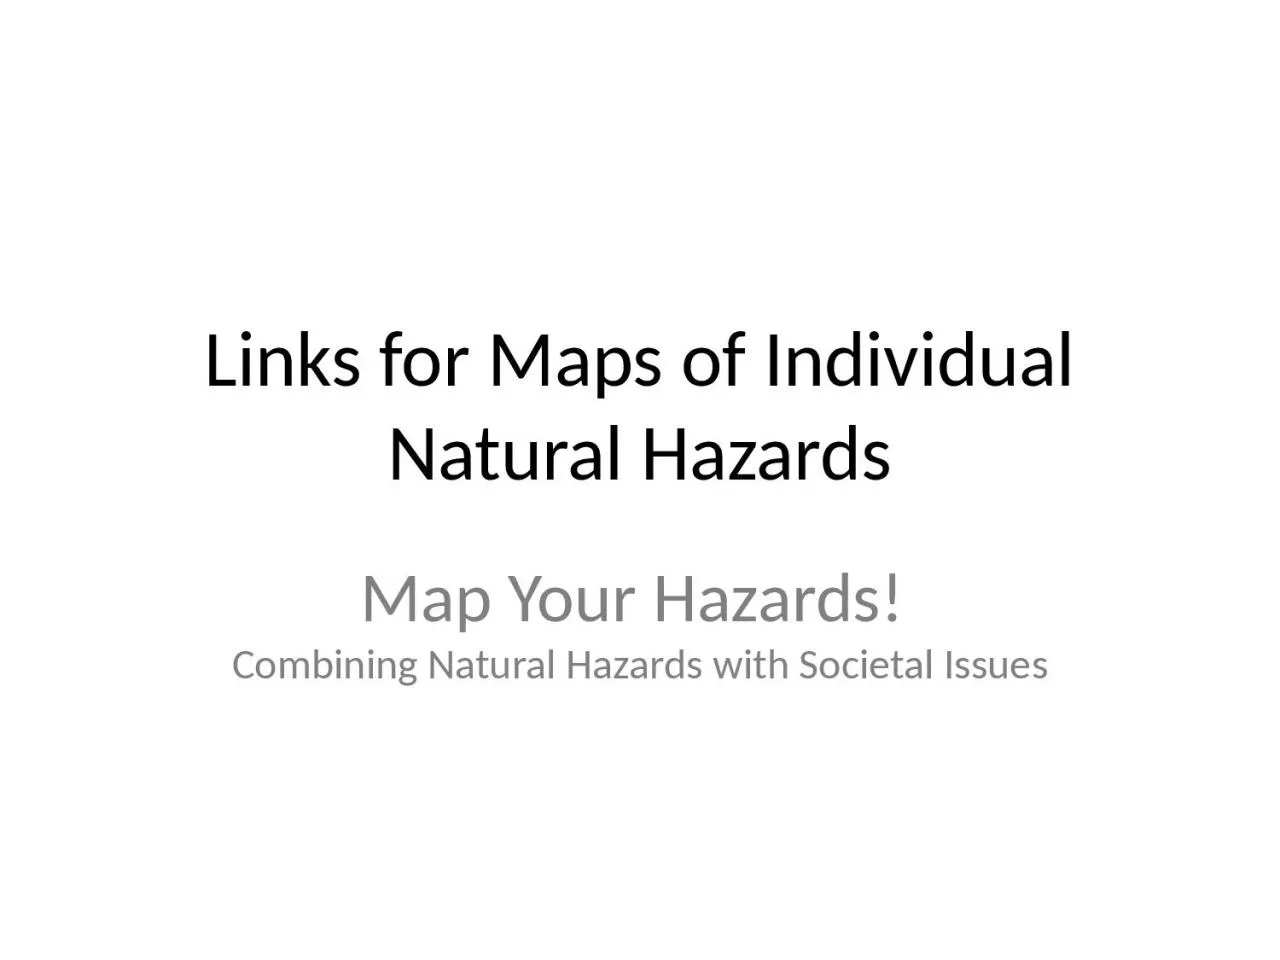 Links for Maps of Individual Natural Hazards